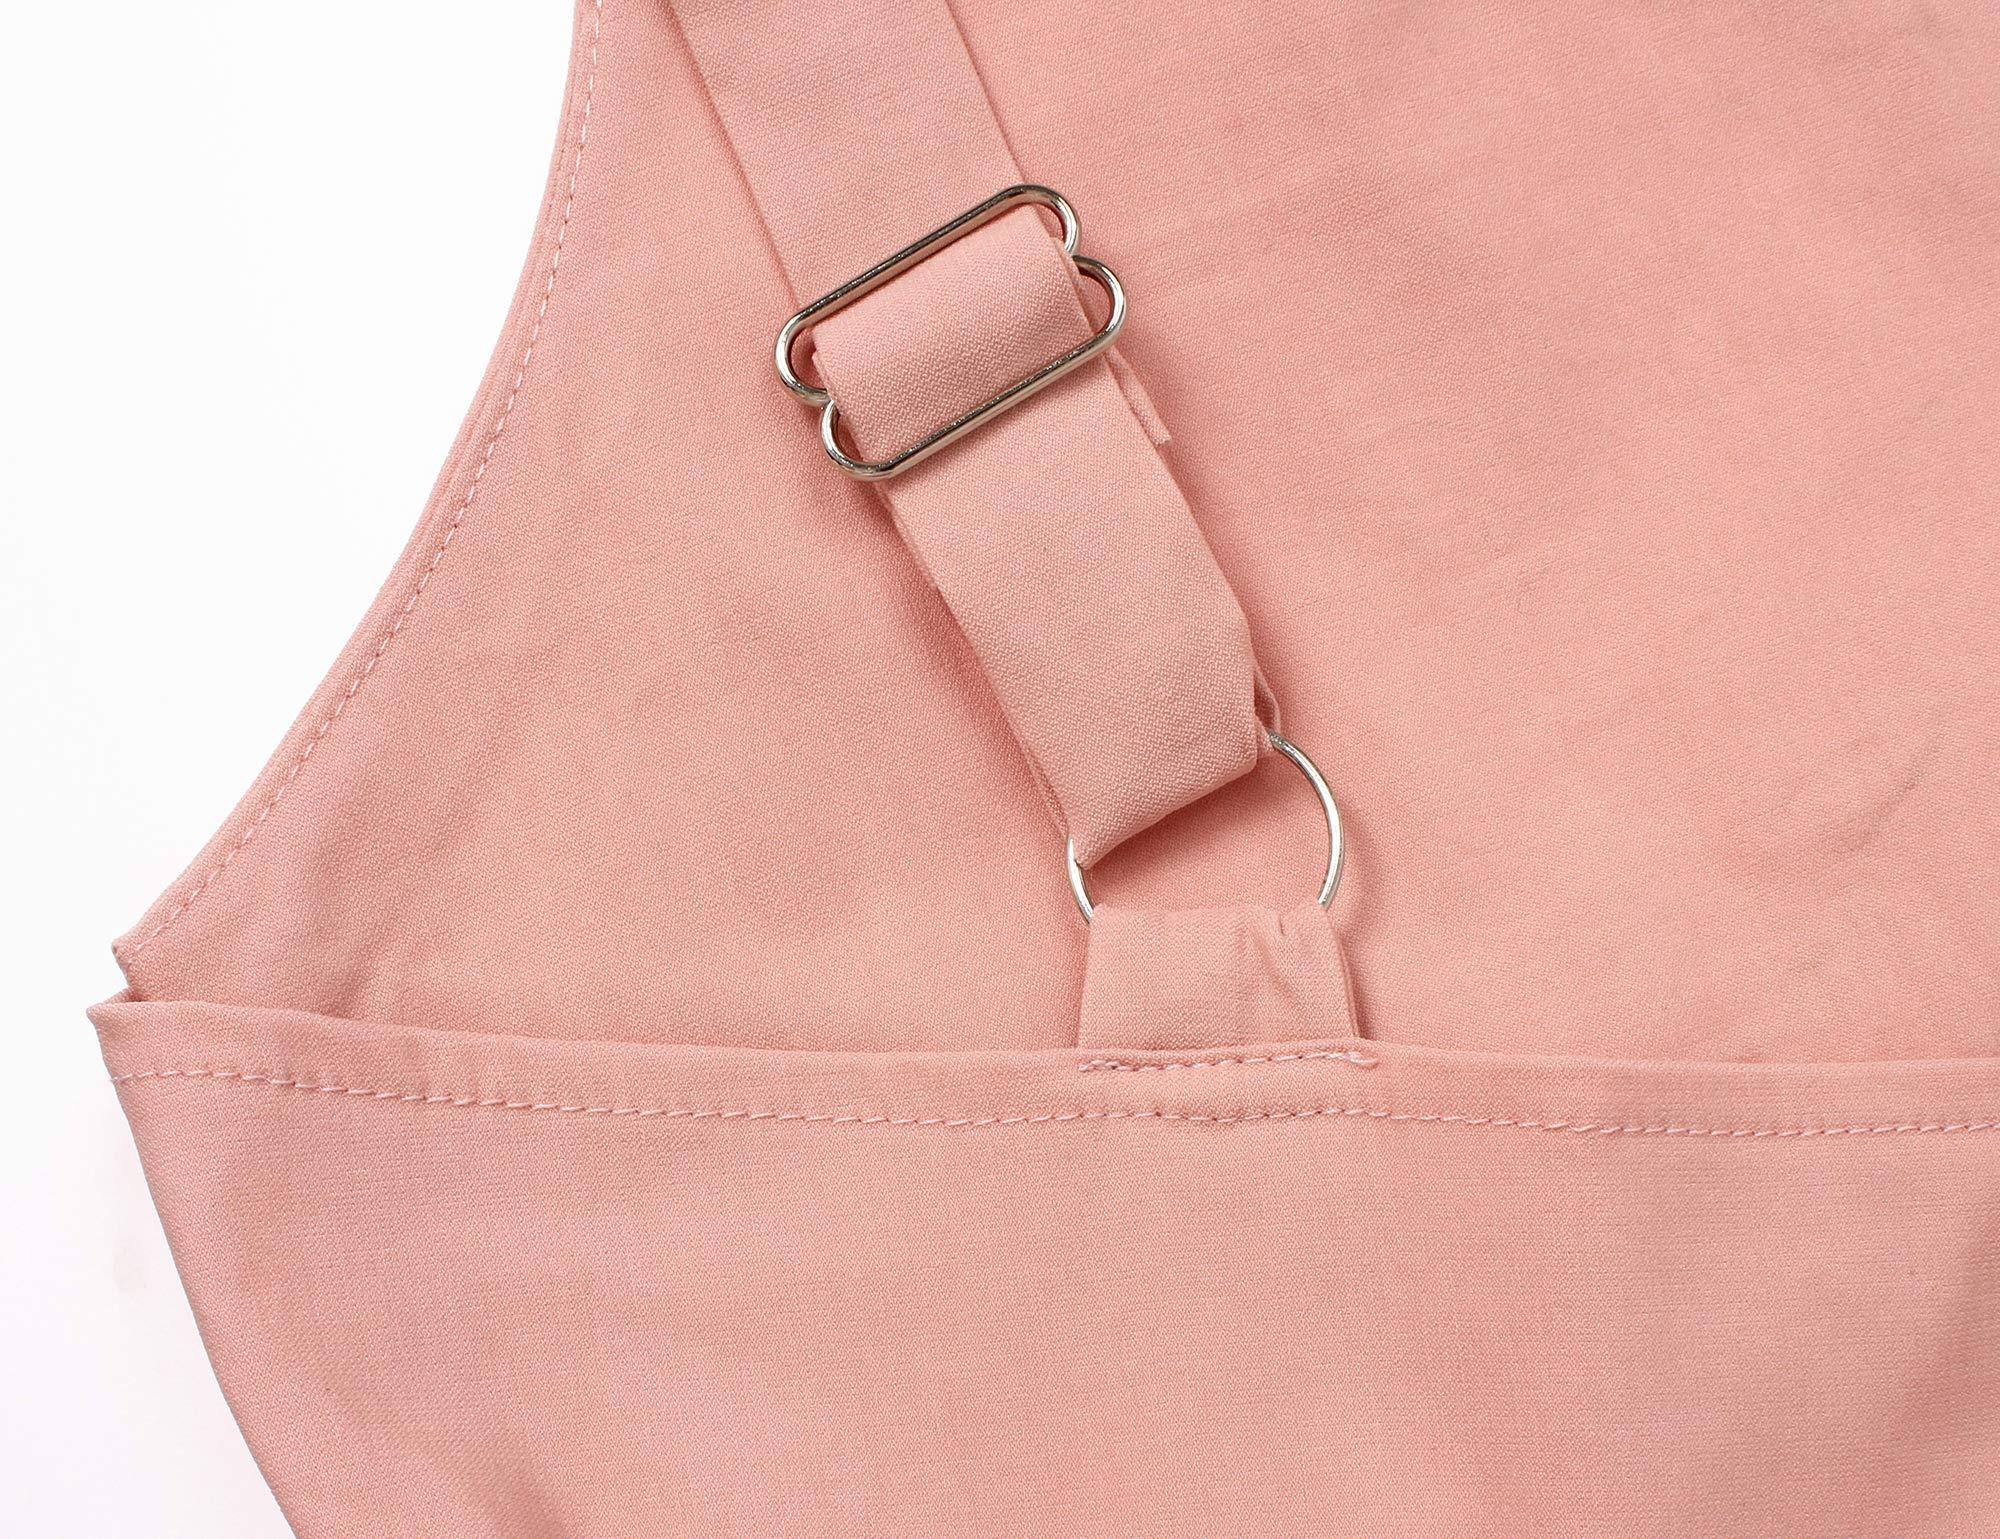 Women Sexy Strap Pink Rompers Summer Bodycon Boat Neck Ruffles Short Pants Cute Jumpsuits with Waistband Zipper Pockets - Bona Fide Fashion